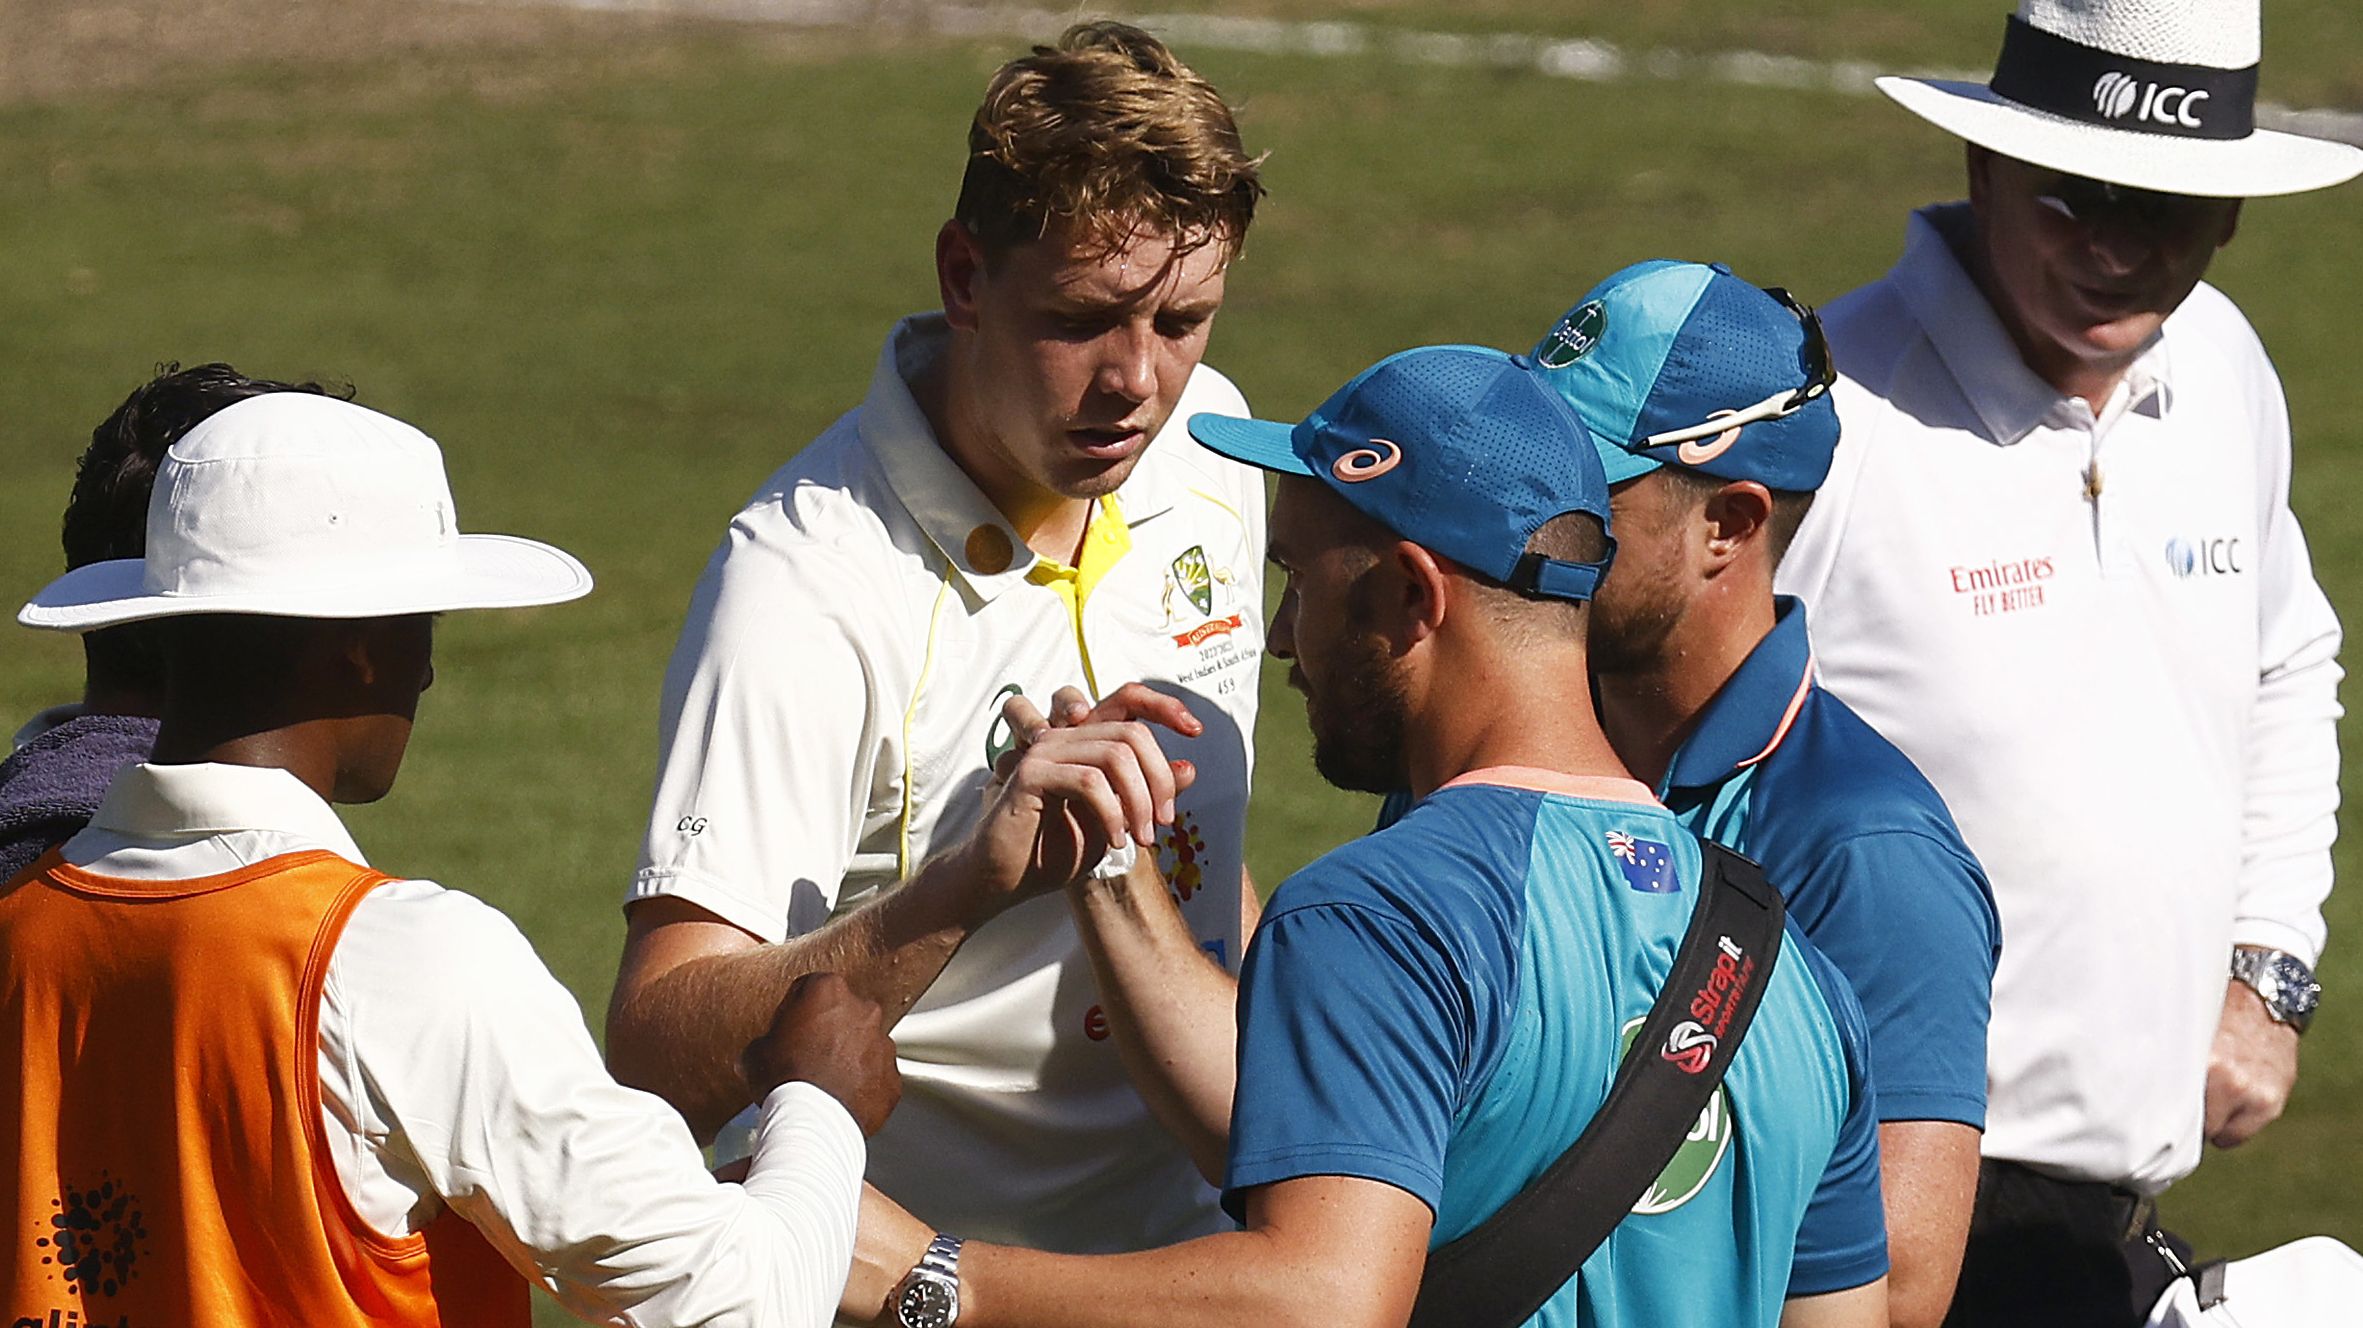 Cameron Green of Australia receives treatment for a cut finger on his right hand. (Photo by Daniel Pockett - CA/Cricket Australia via Getty Images)